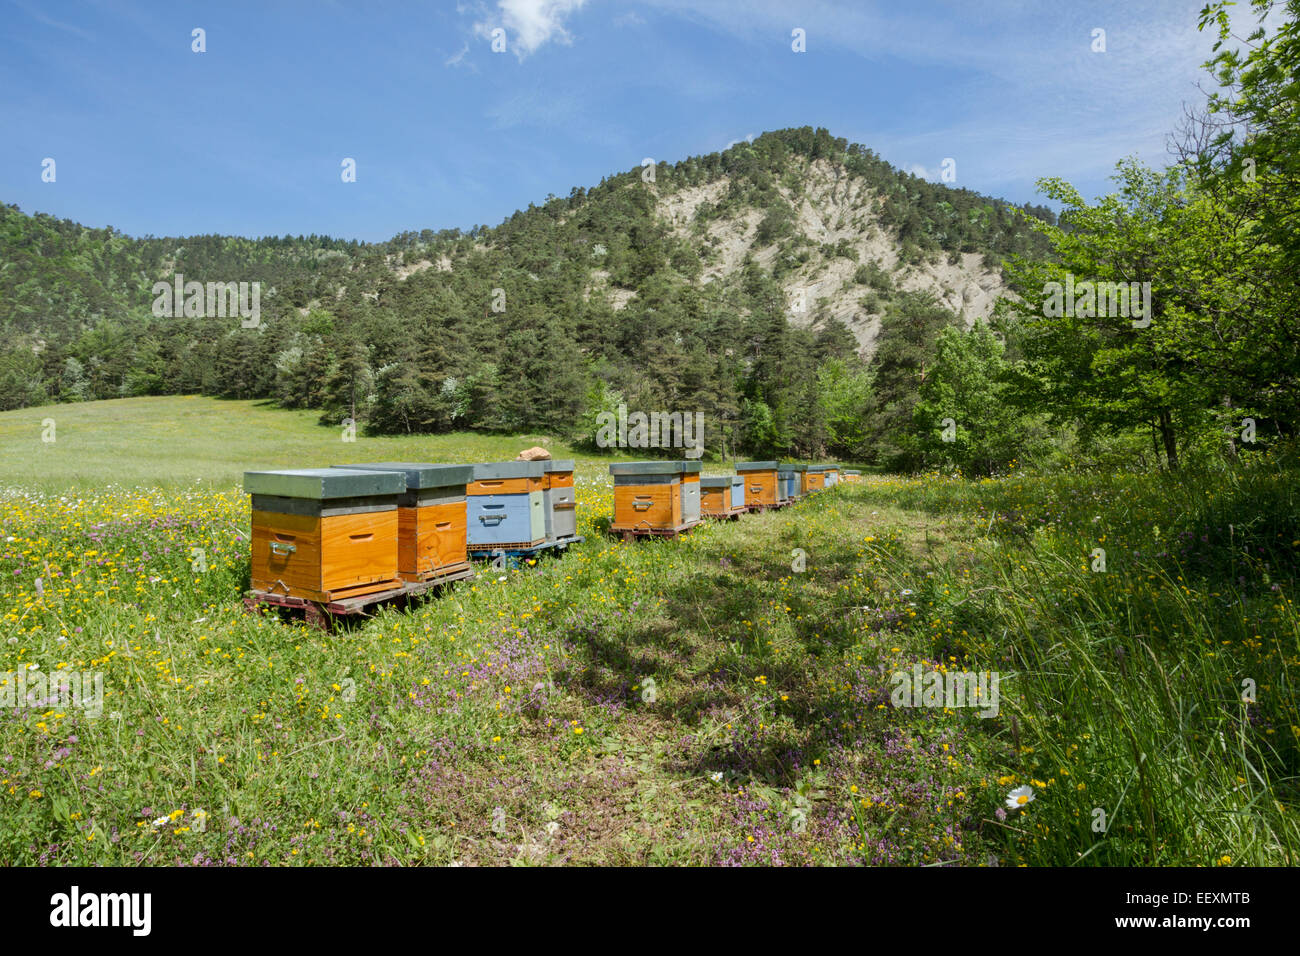 France Isere Parc Naturel Regional du Vercors (Vercors Natural Regional Park) bee hives in a wildflower hay meadow Stock Photo